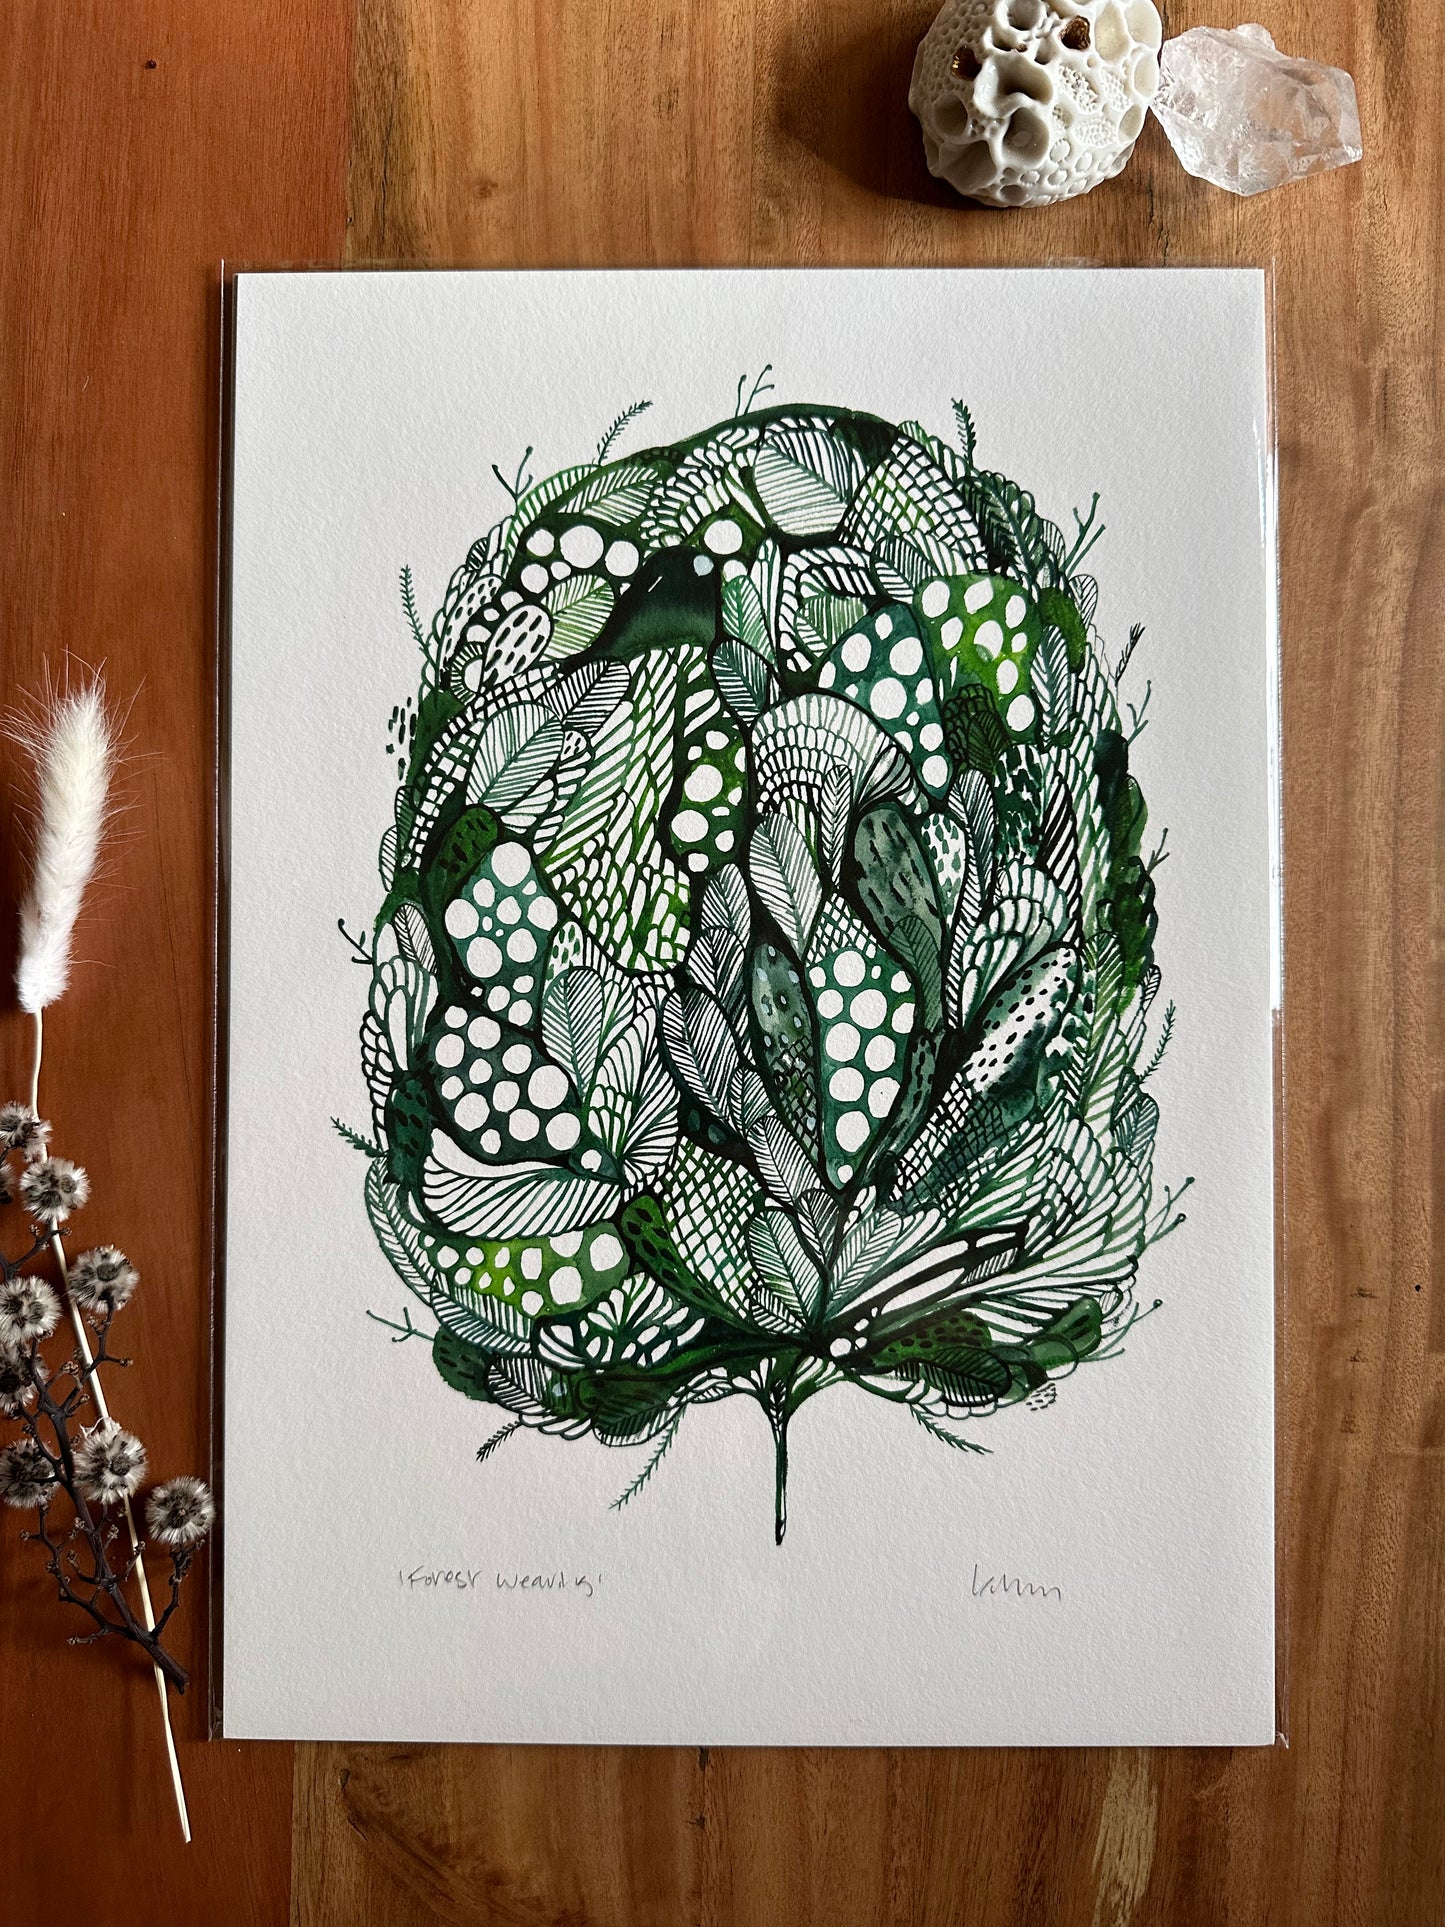 ’Forest Weaving’ giclee print in A3, A4 or a5